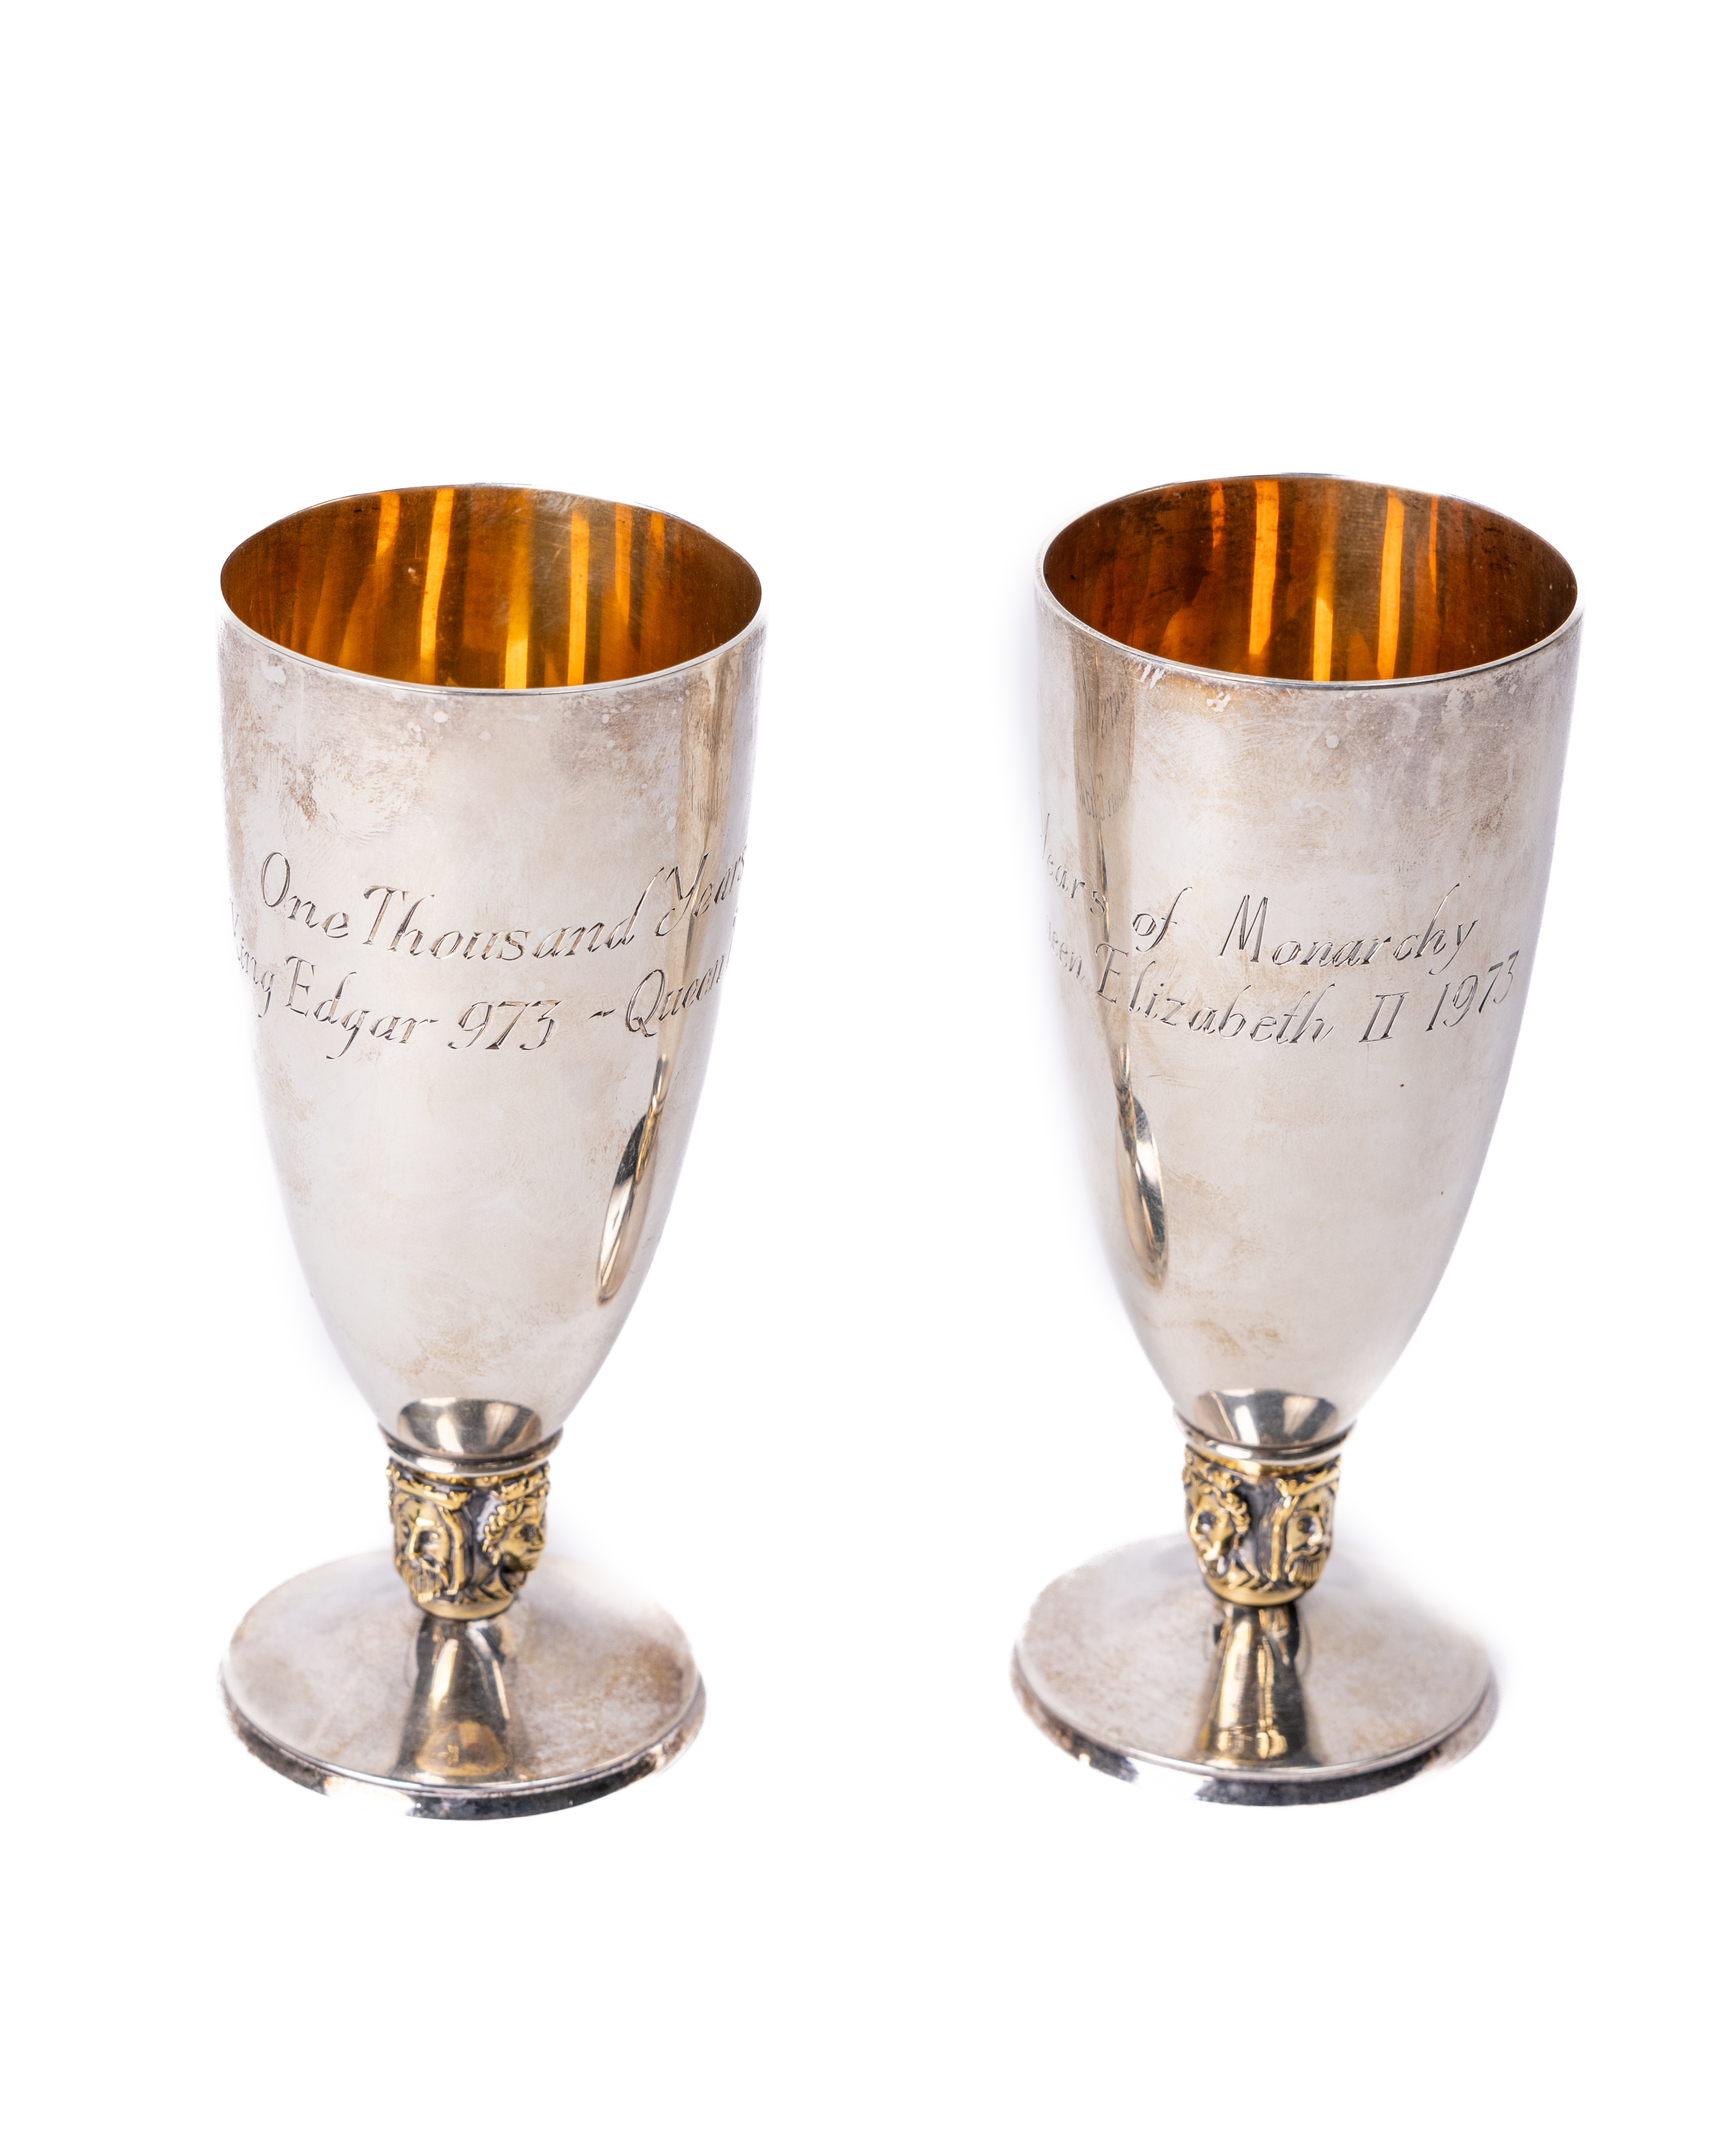 A pair of Commemorative silver gilt Goblets, "One Thousand Years of Monarchy, King Edgar 973 - Queen